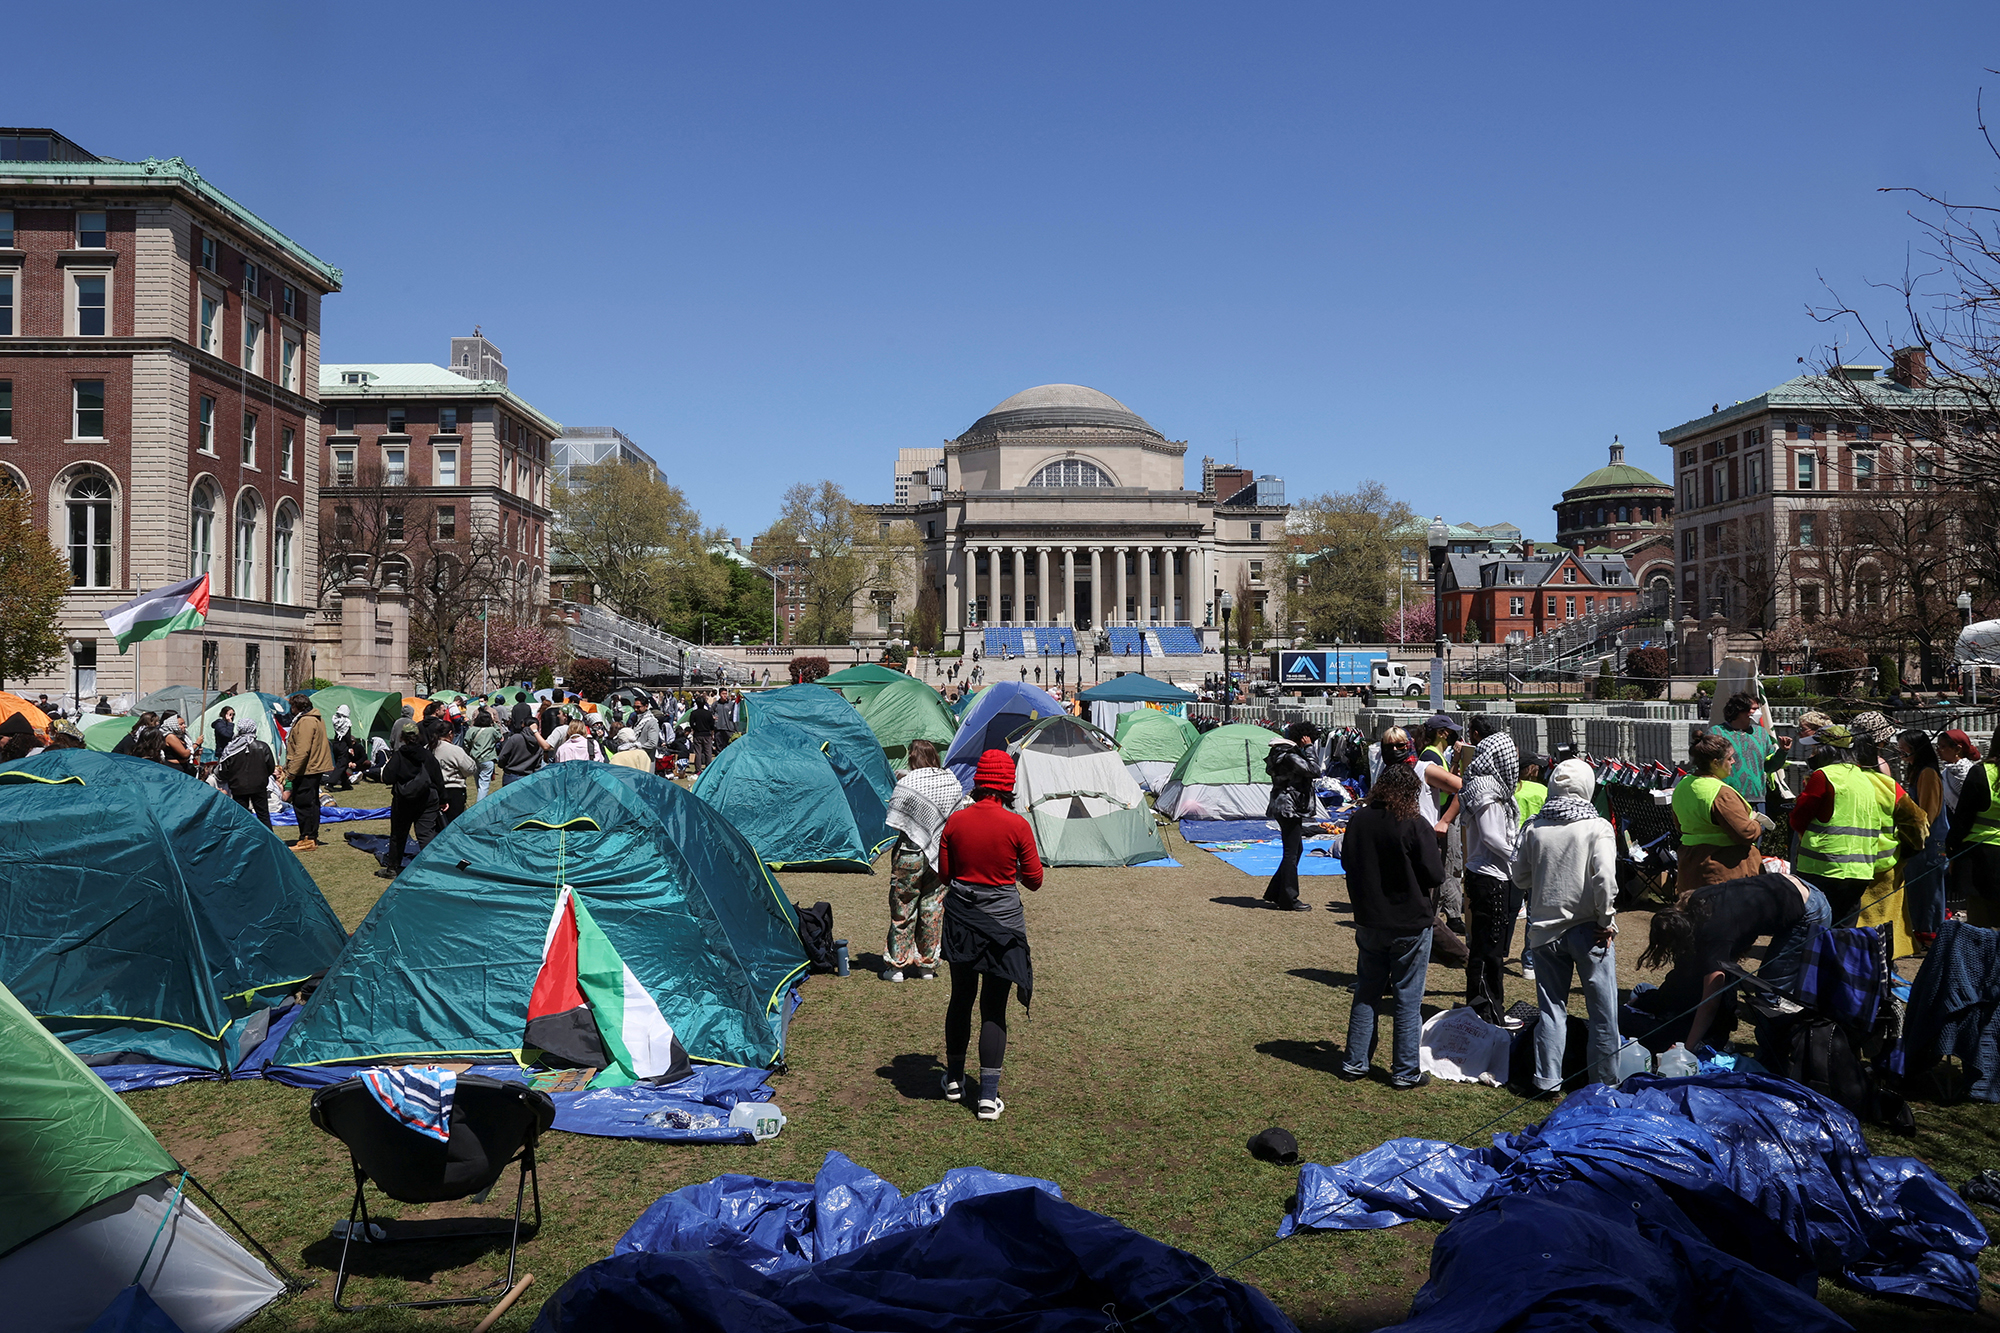 Students protest in support of Palestinians on Columbia University campus, as protests continue inside and outside the university in New York City on April 22.